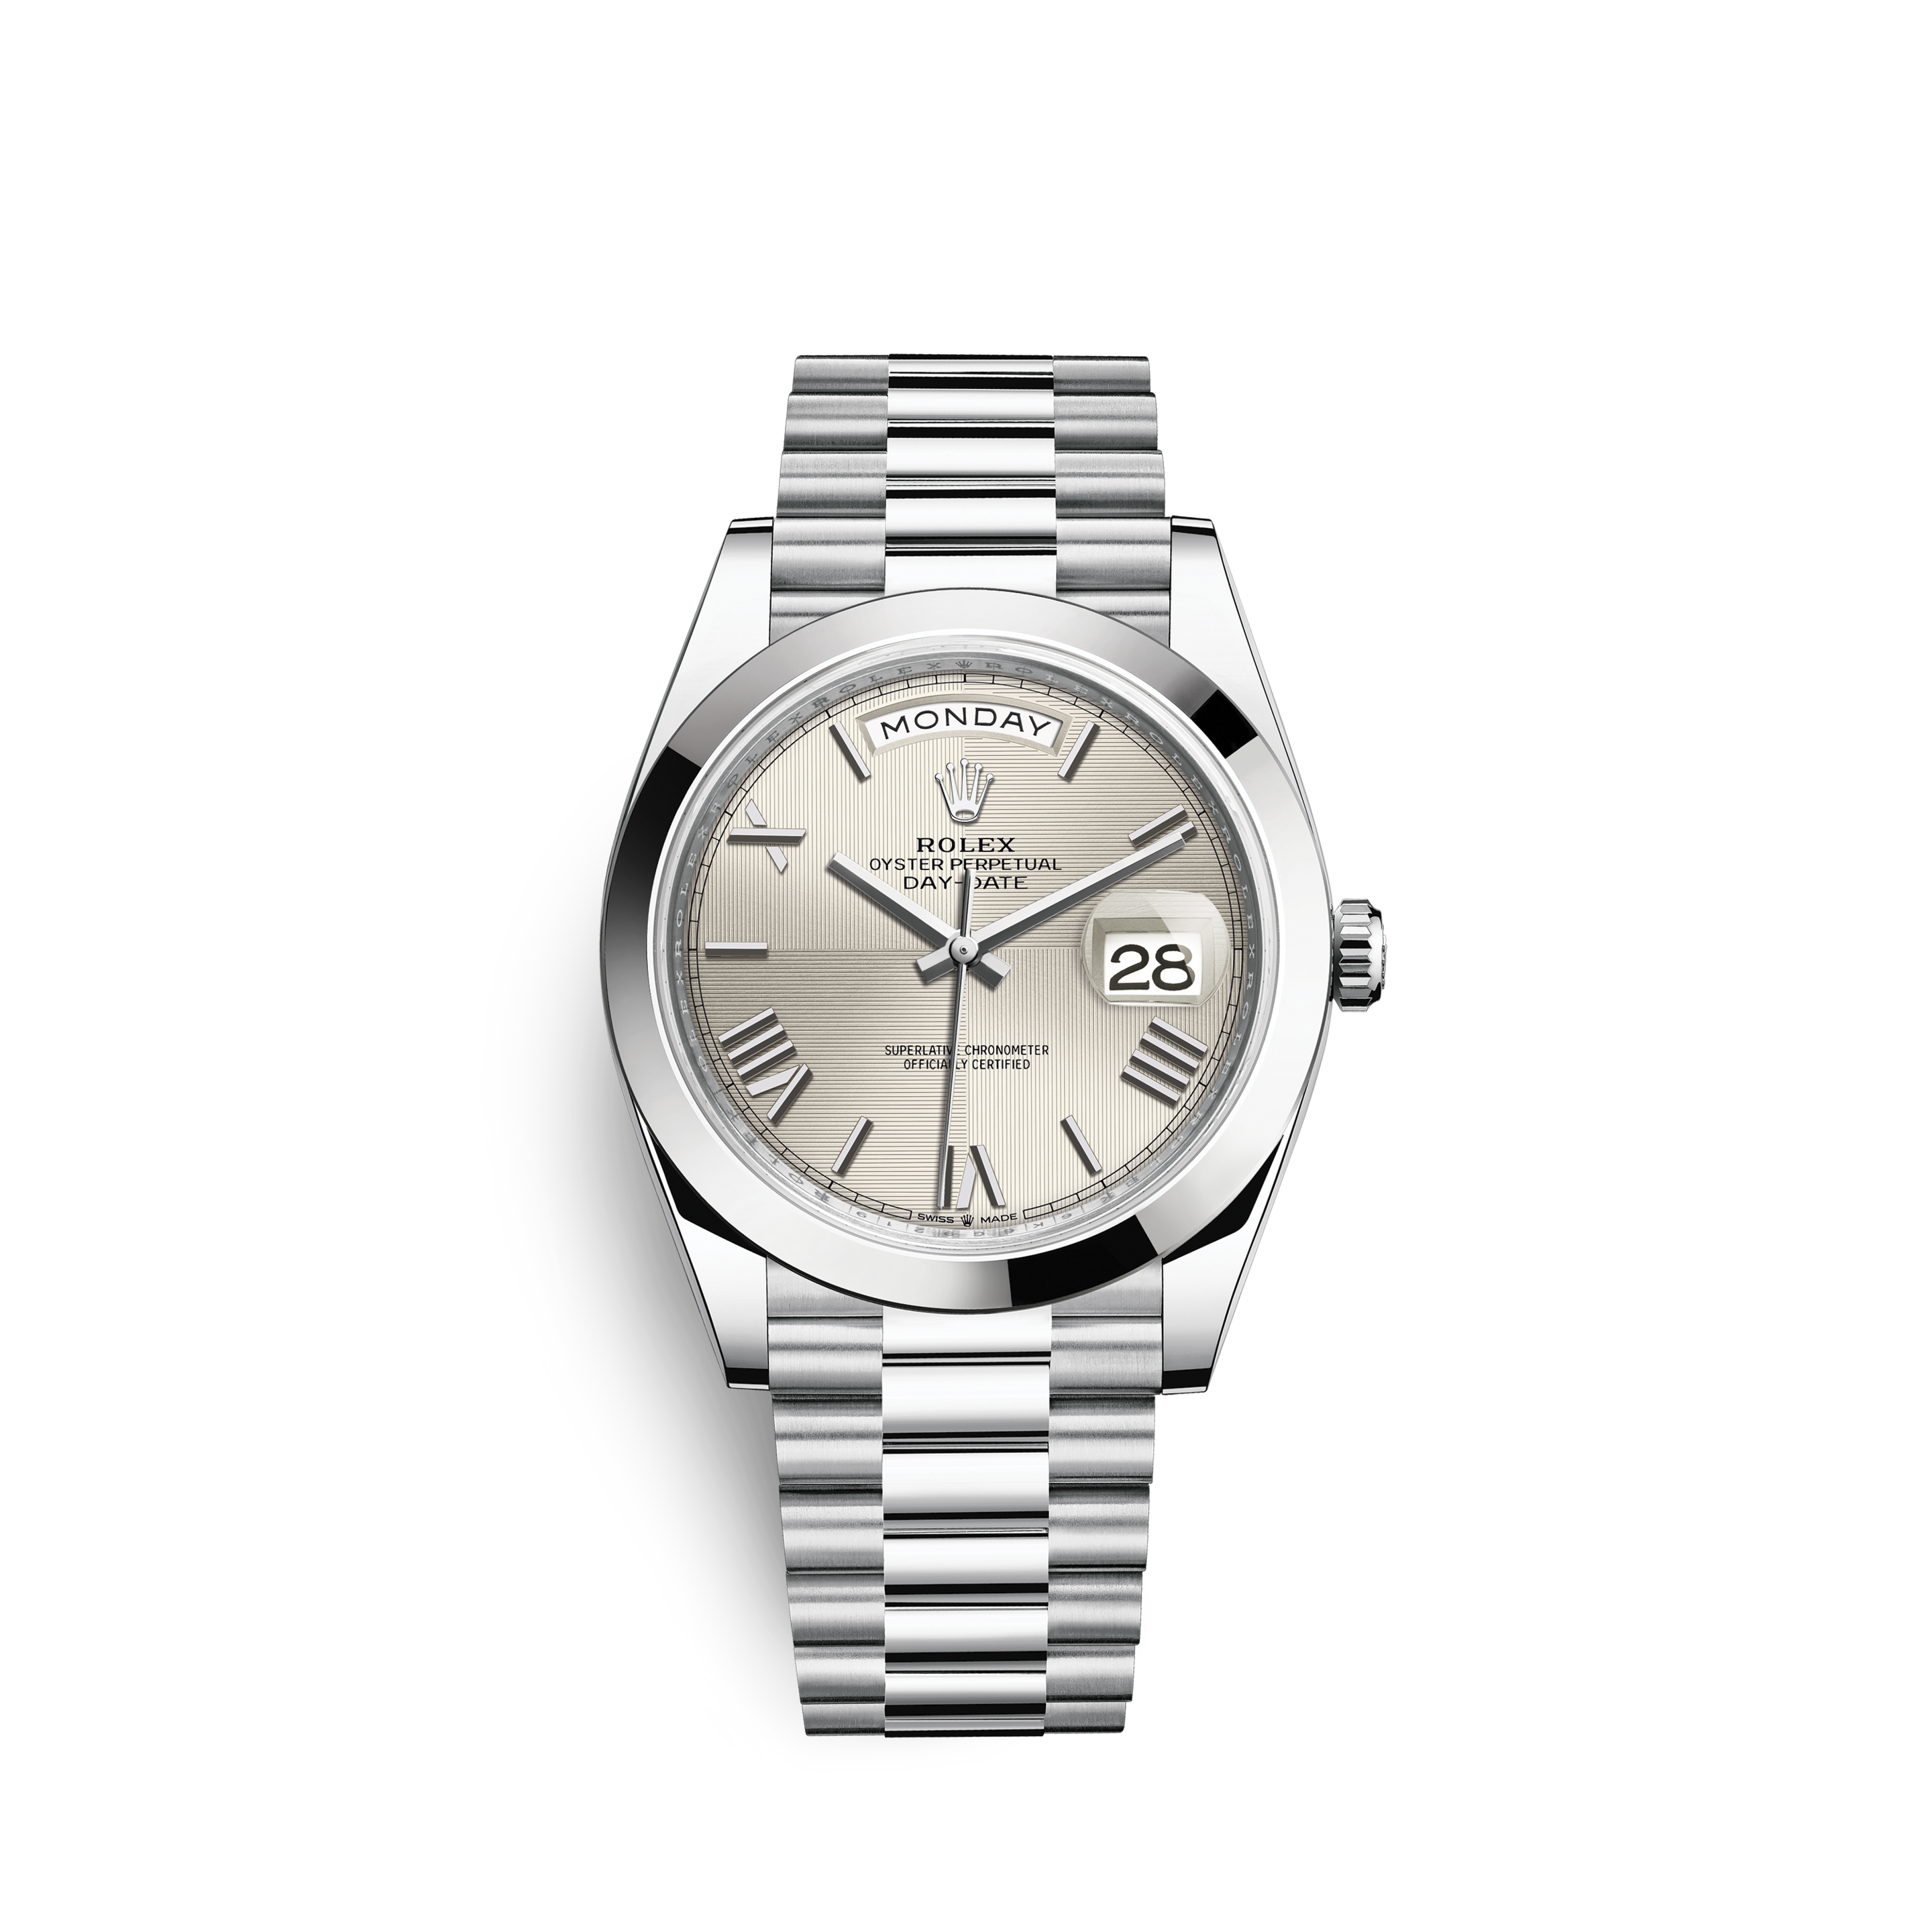 old rolex oyster perpetual day date